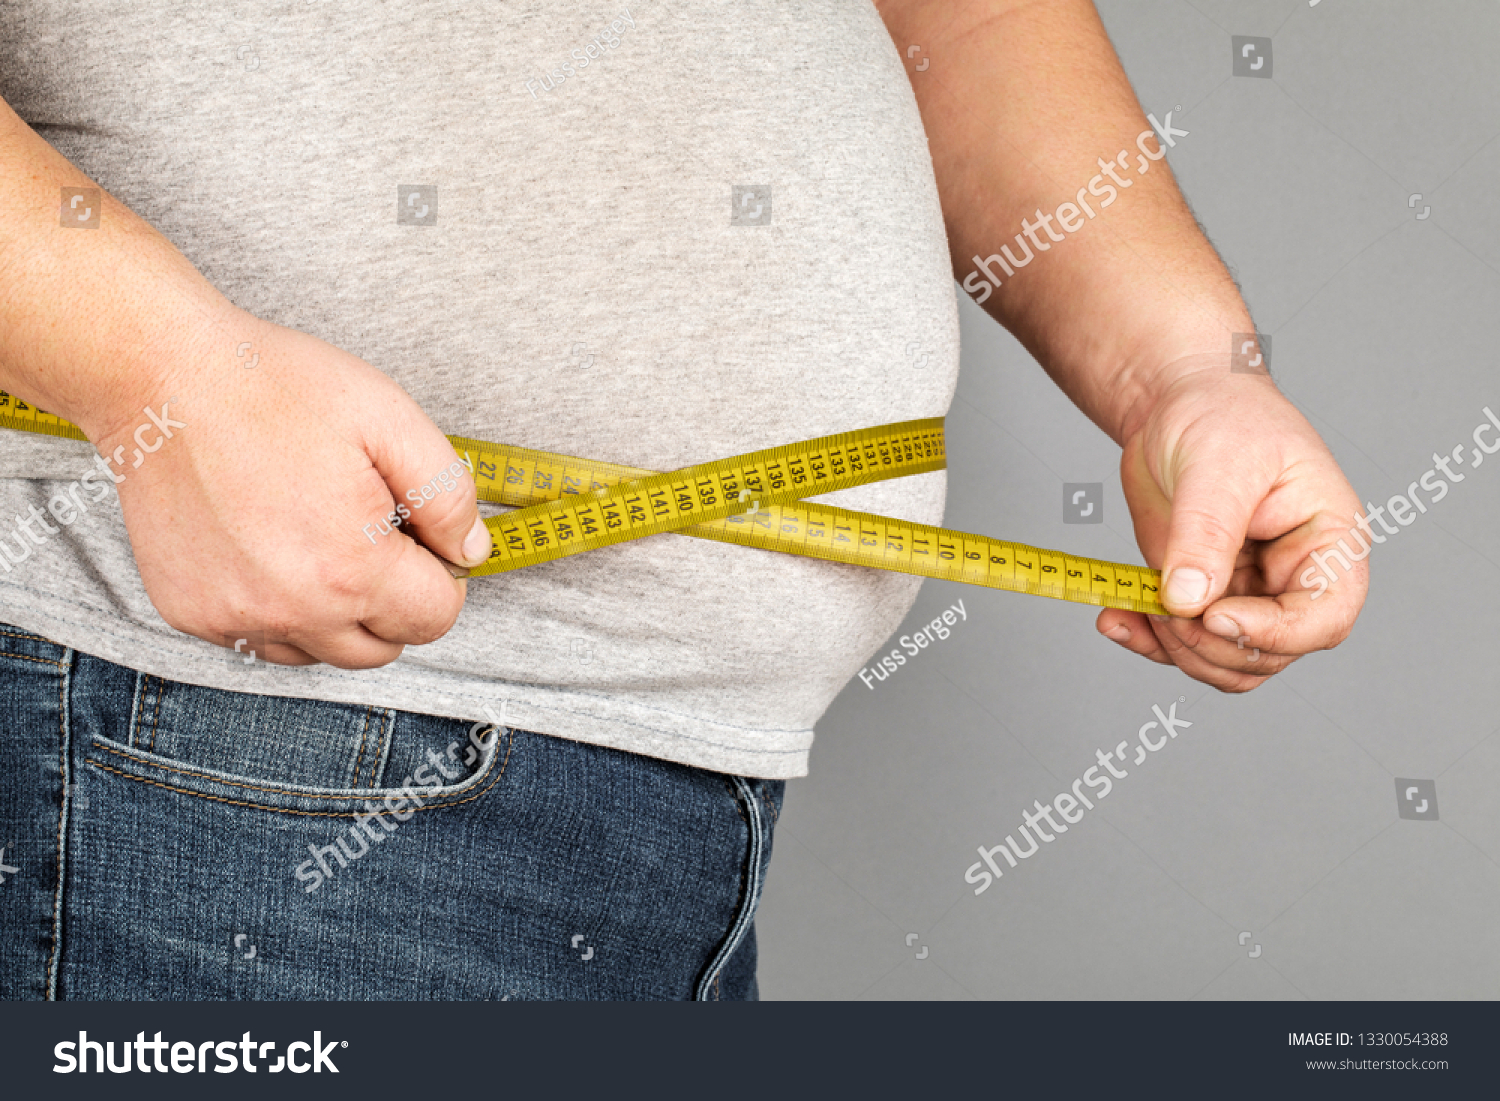 A man measures his fat belly with a measuring tape. on a gray background #1330054388